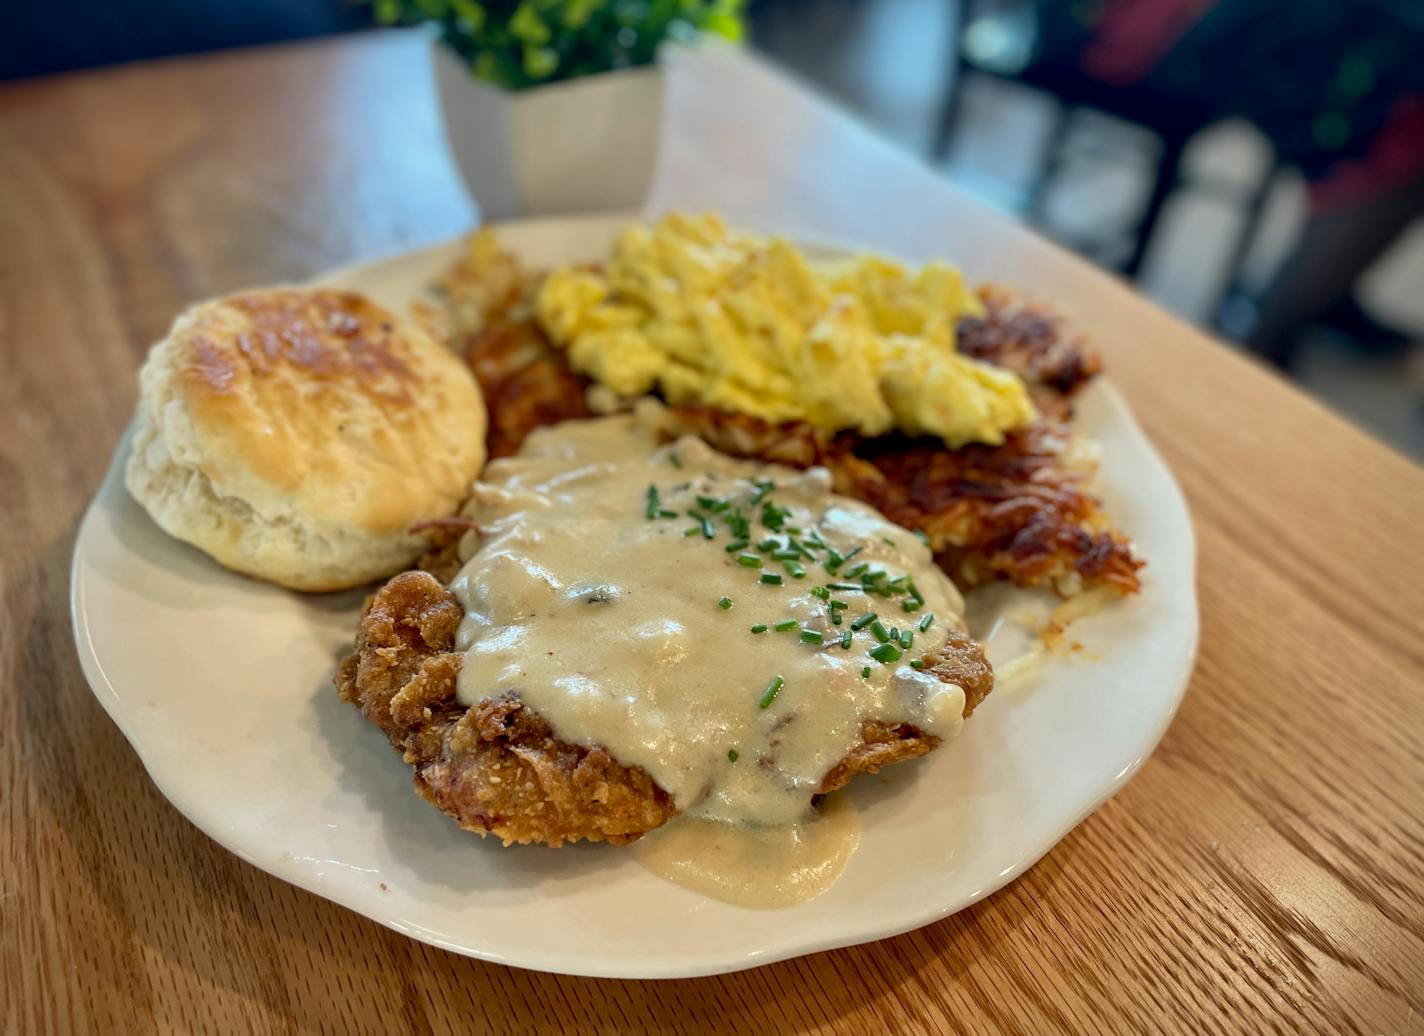 Country fried steak with peppery breakfast gravy dripping off the top, served with a biscuit, hashbrowns and some scrambled eggs.